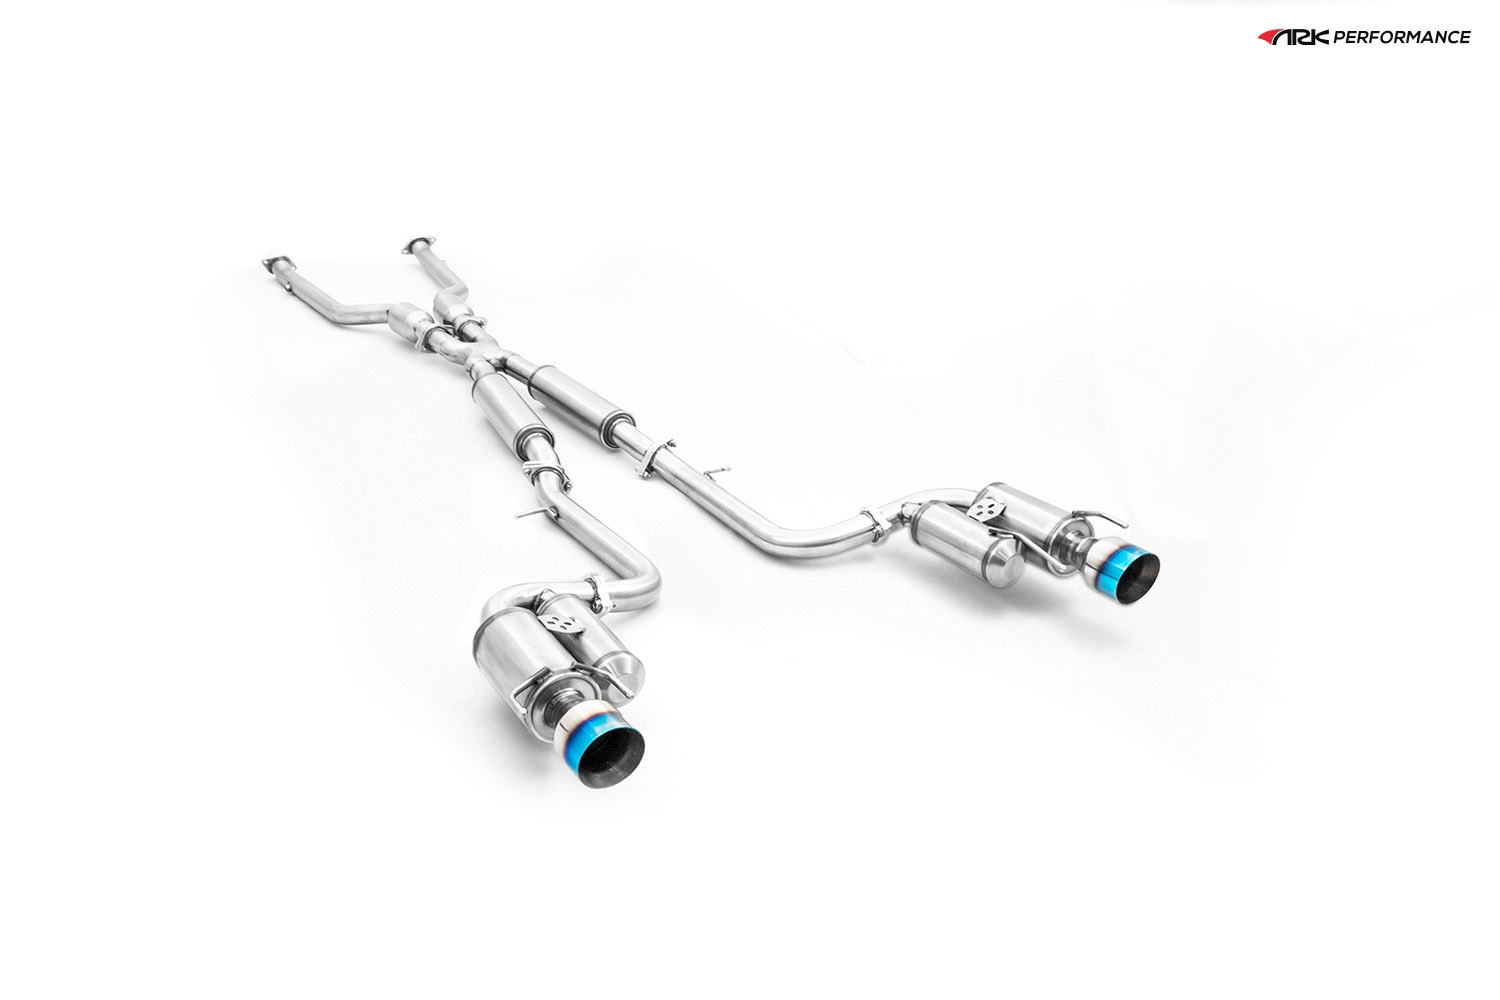 Ark Performance Stainless Steel GRiP Cat-Back Exhaust System 2.5in Pipe w/ 4.5 Burnt Single Tip, Dual Exit - Lexus IS 250 / 300 / 350 AWD 14-16 2.5L V6, 3.5L V6 GSE35 / GSE36 / GSE37